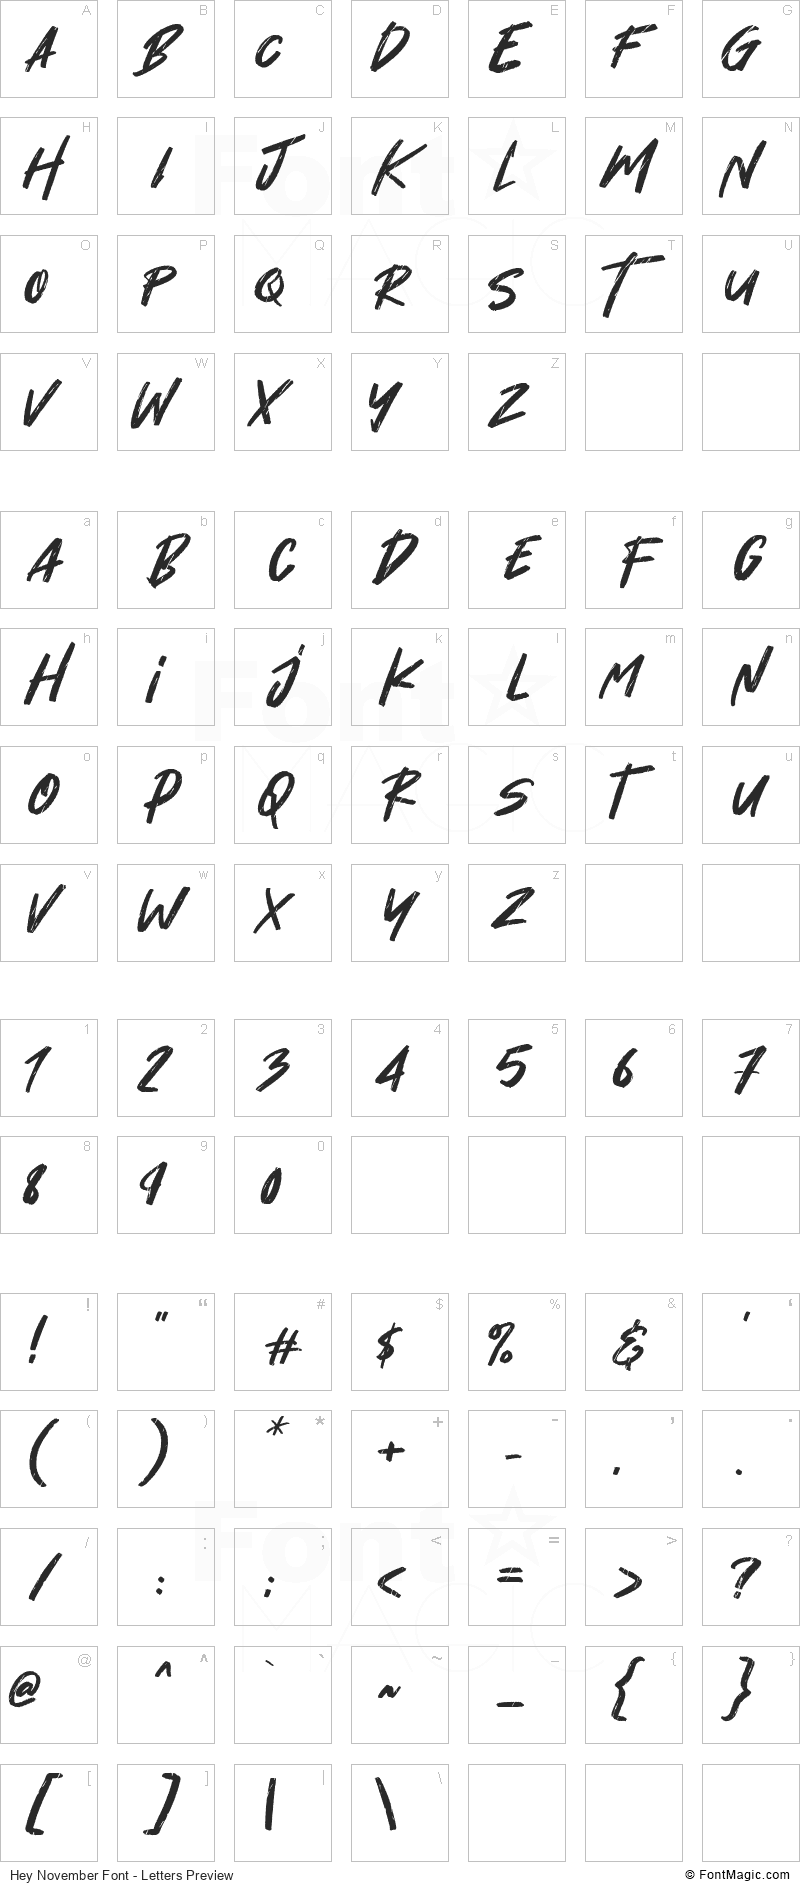 Hey November Font - All Latters Preview Chart